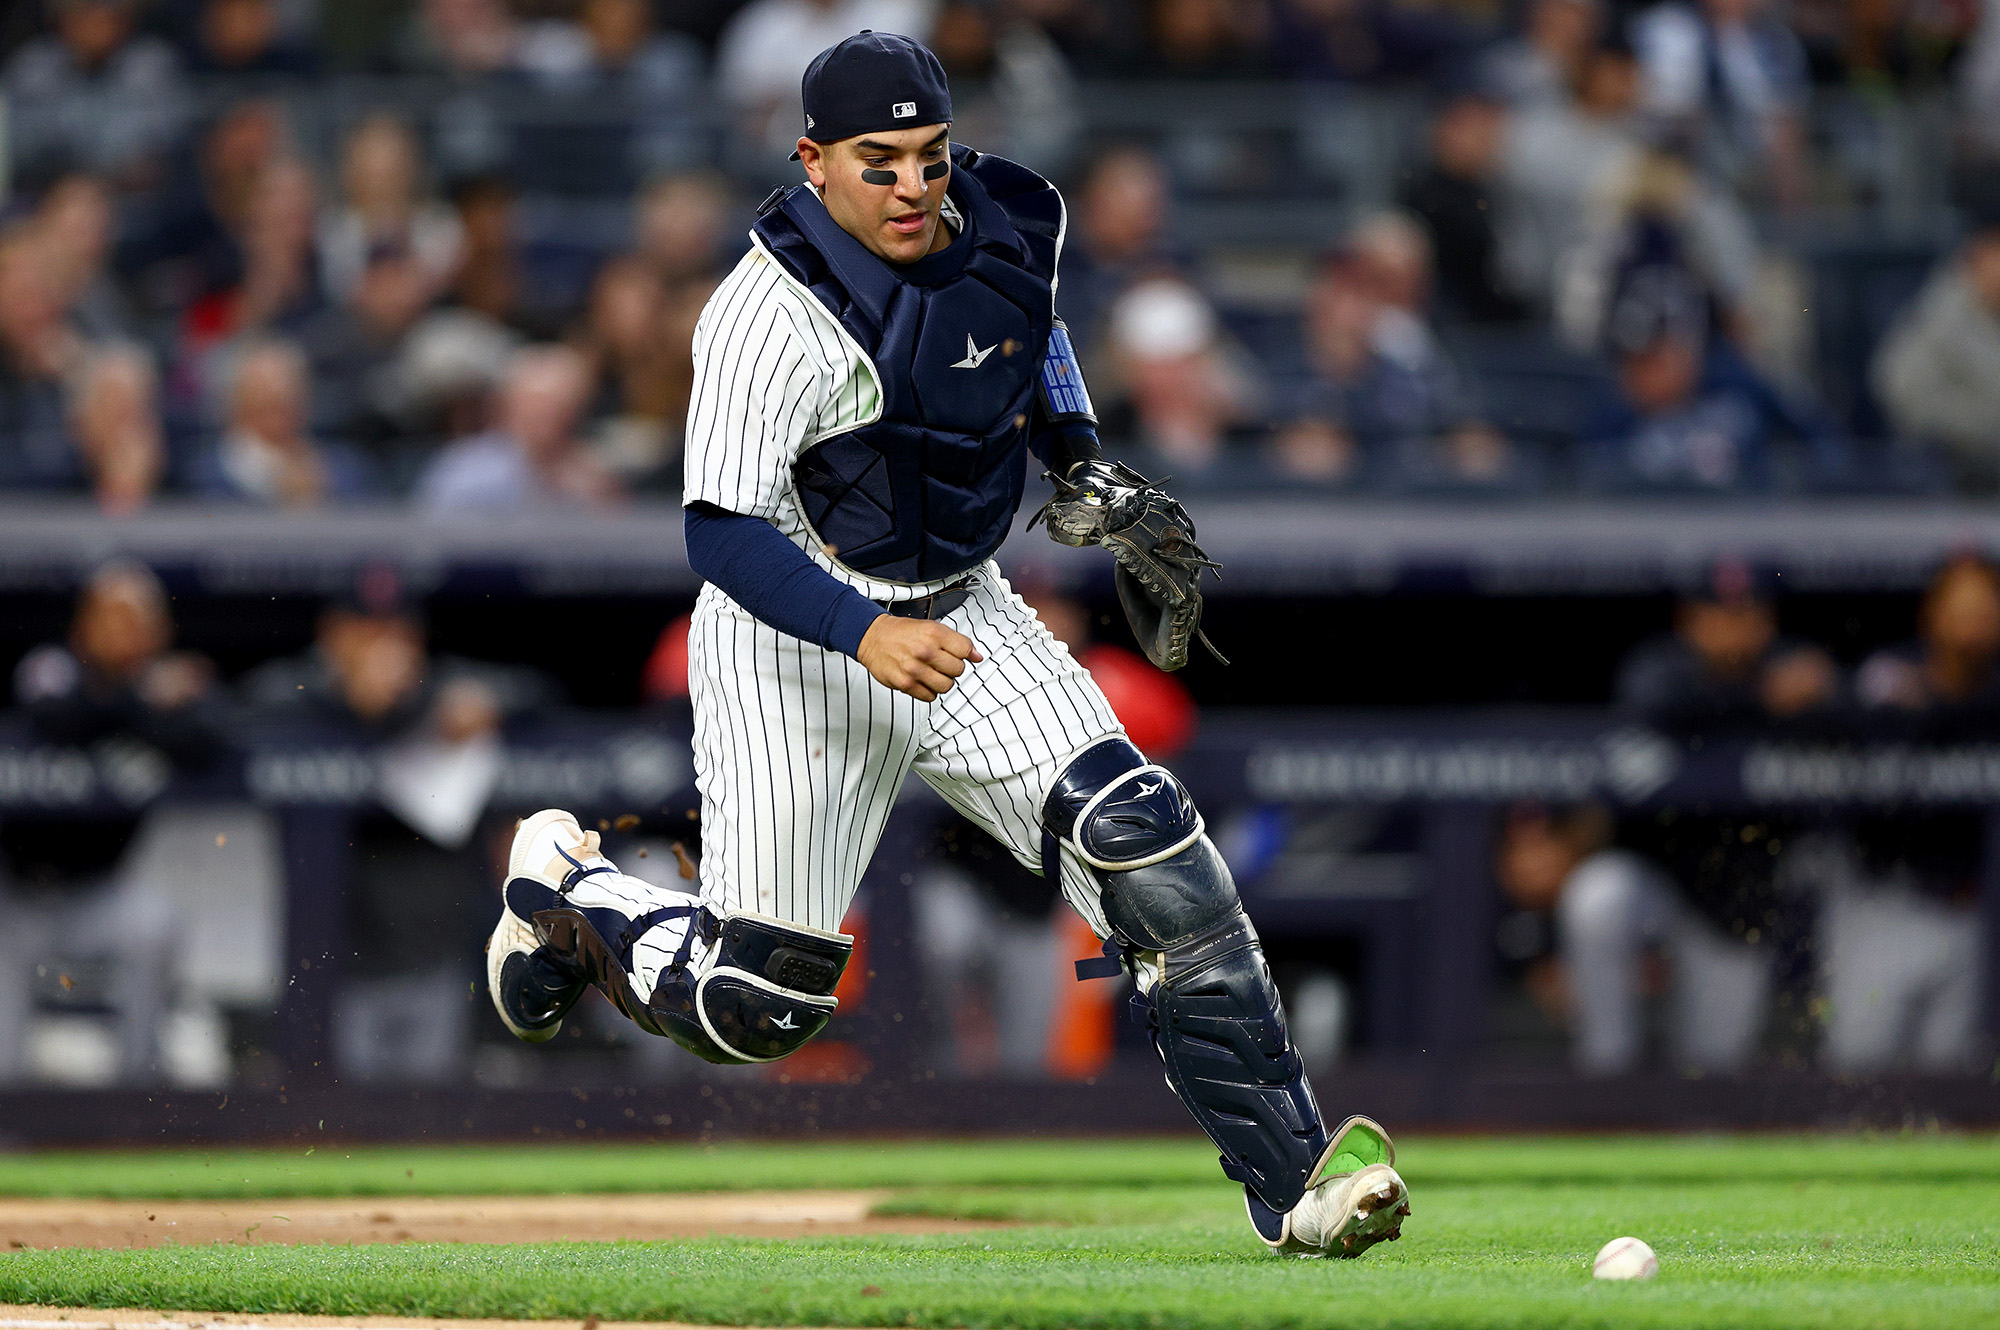 Yankees' pitching staff now elite thanks to new catching mindset